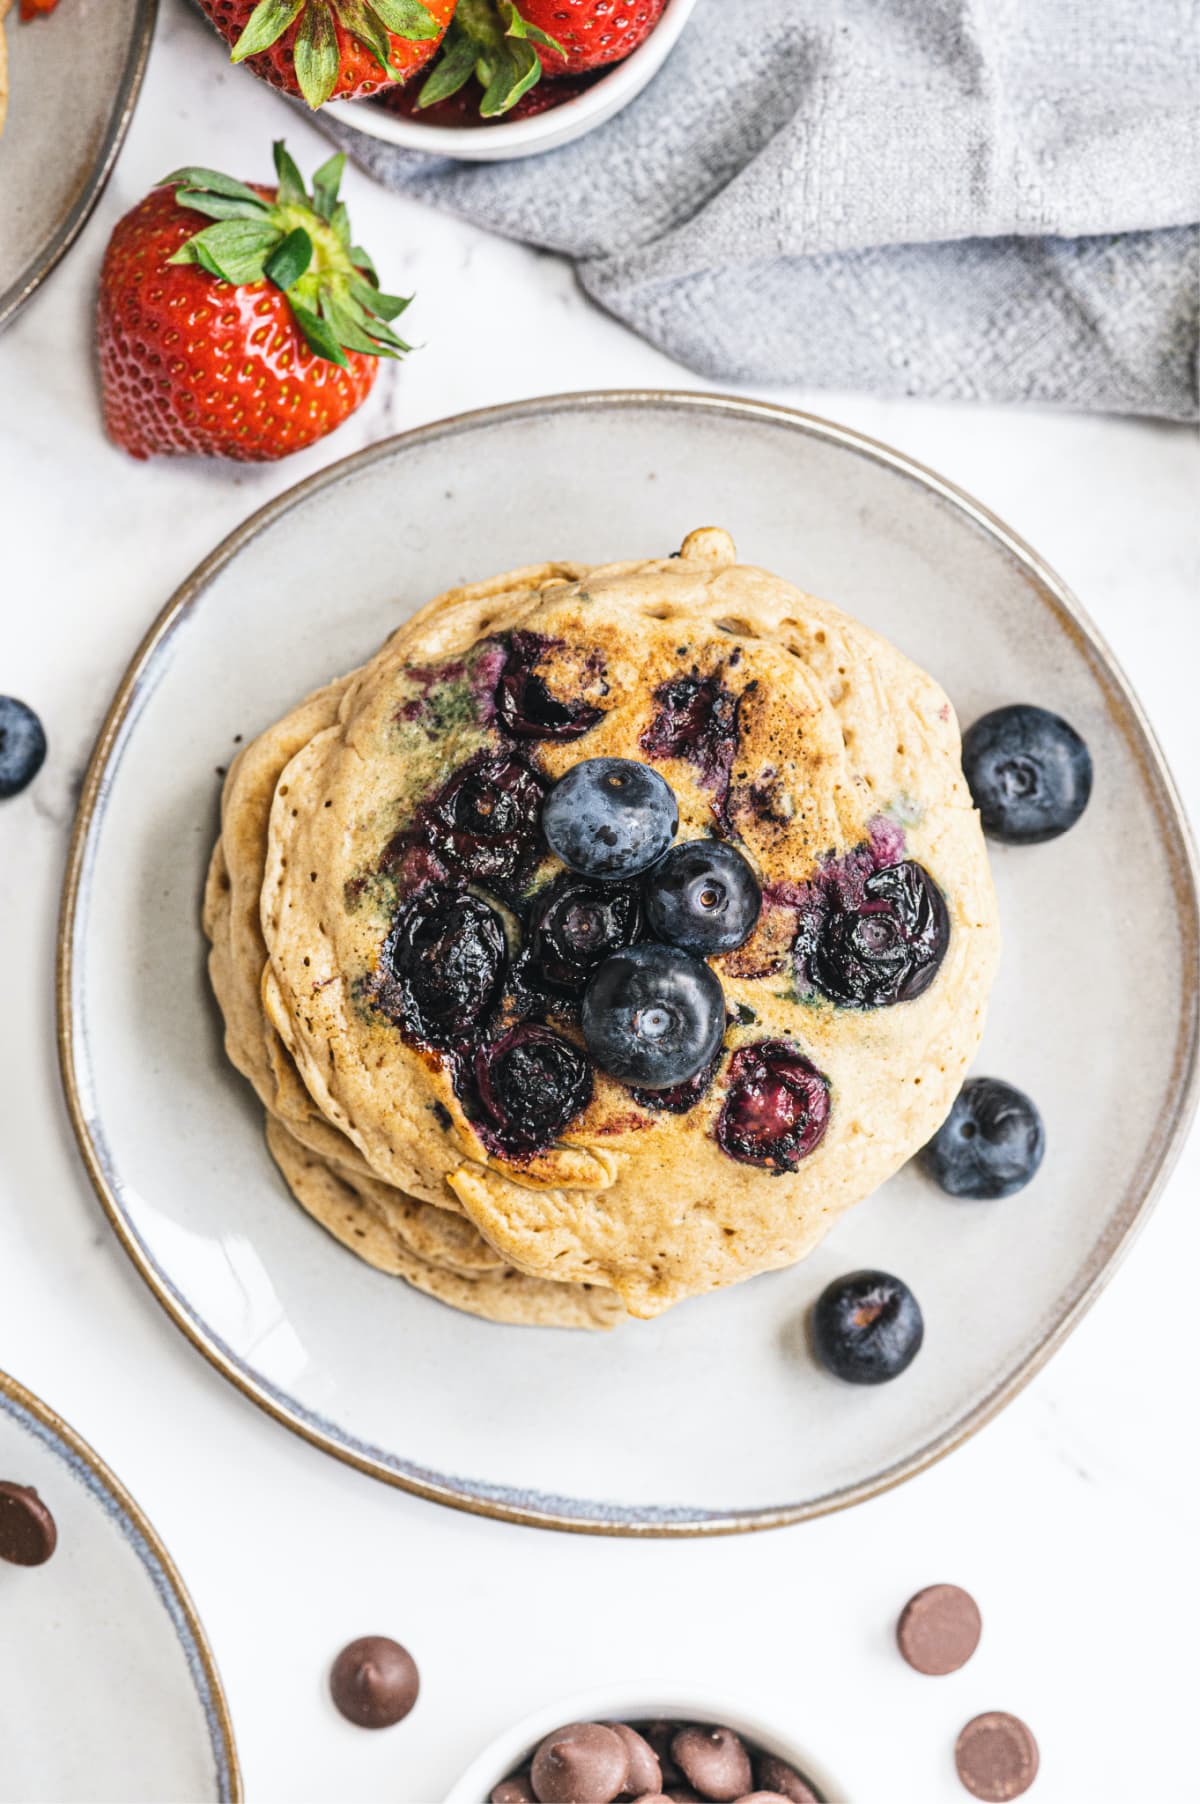 A short stack of Gluten Free pancakes made with blueberries and then topped with additional blueberries on a white plate with a bronze rim.